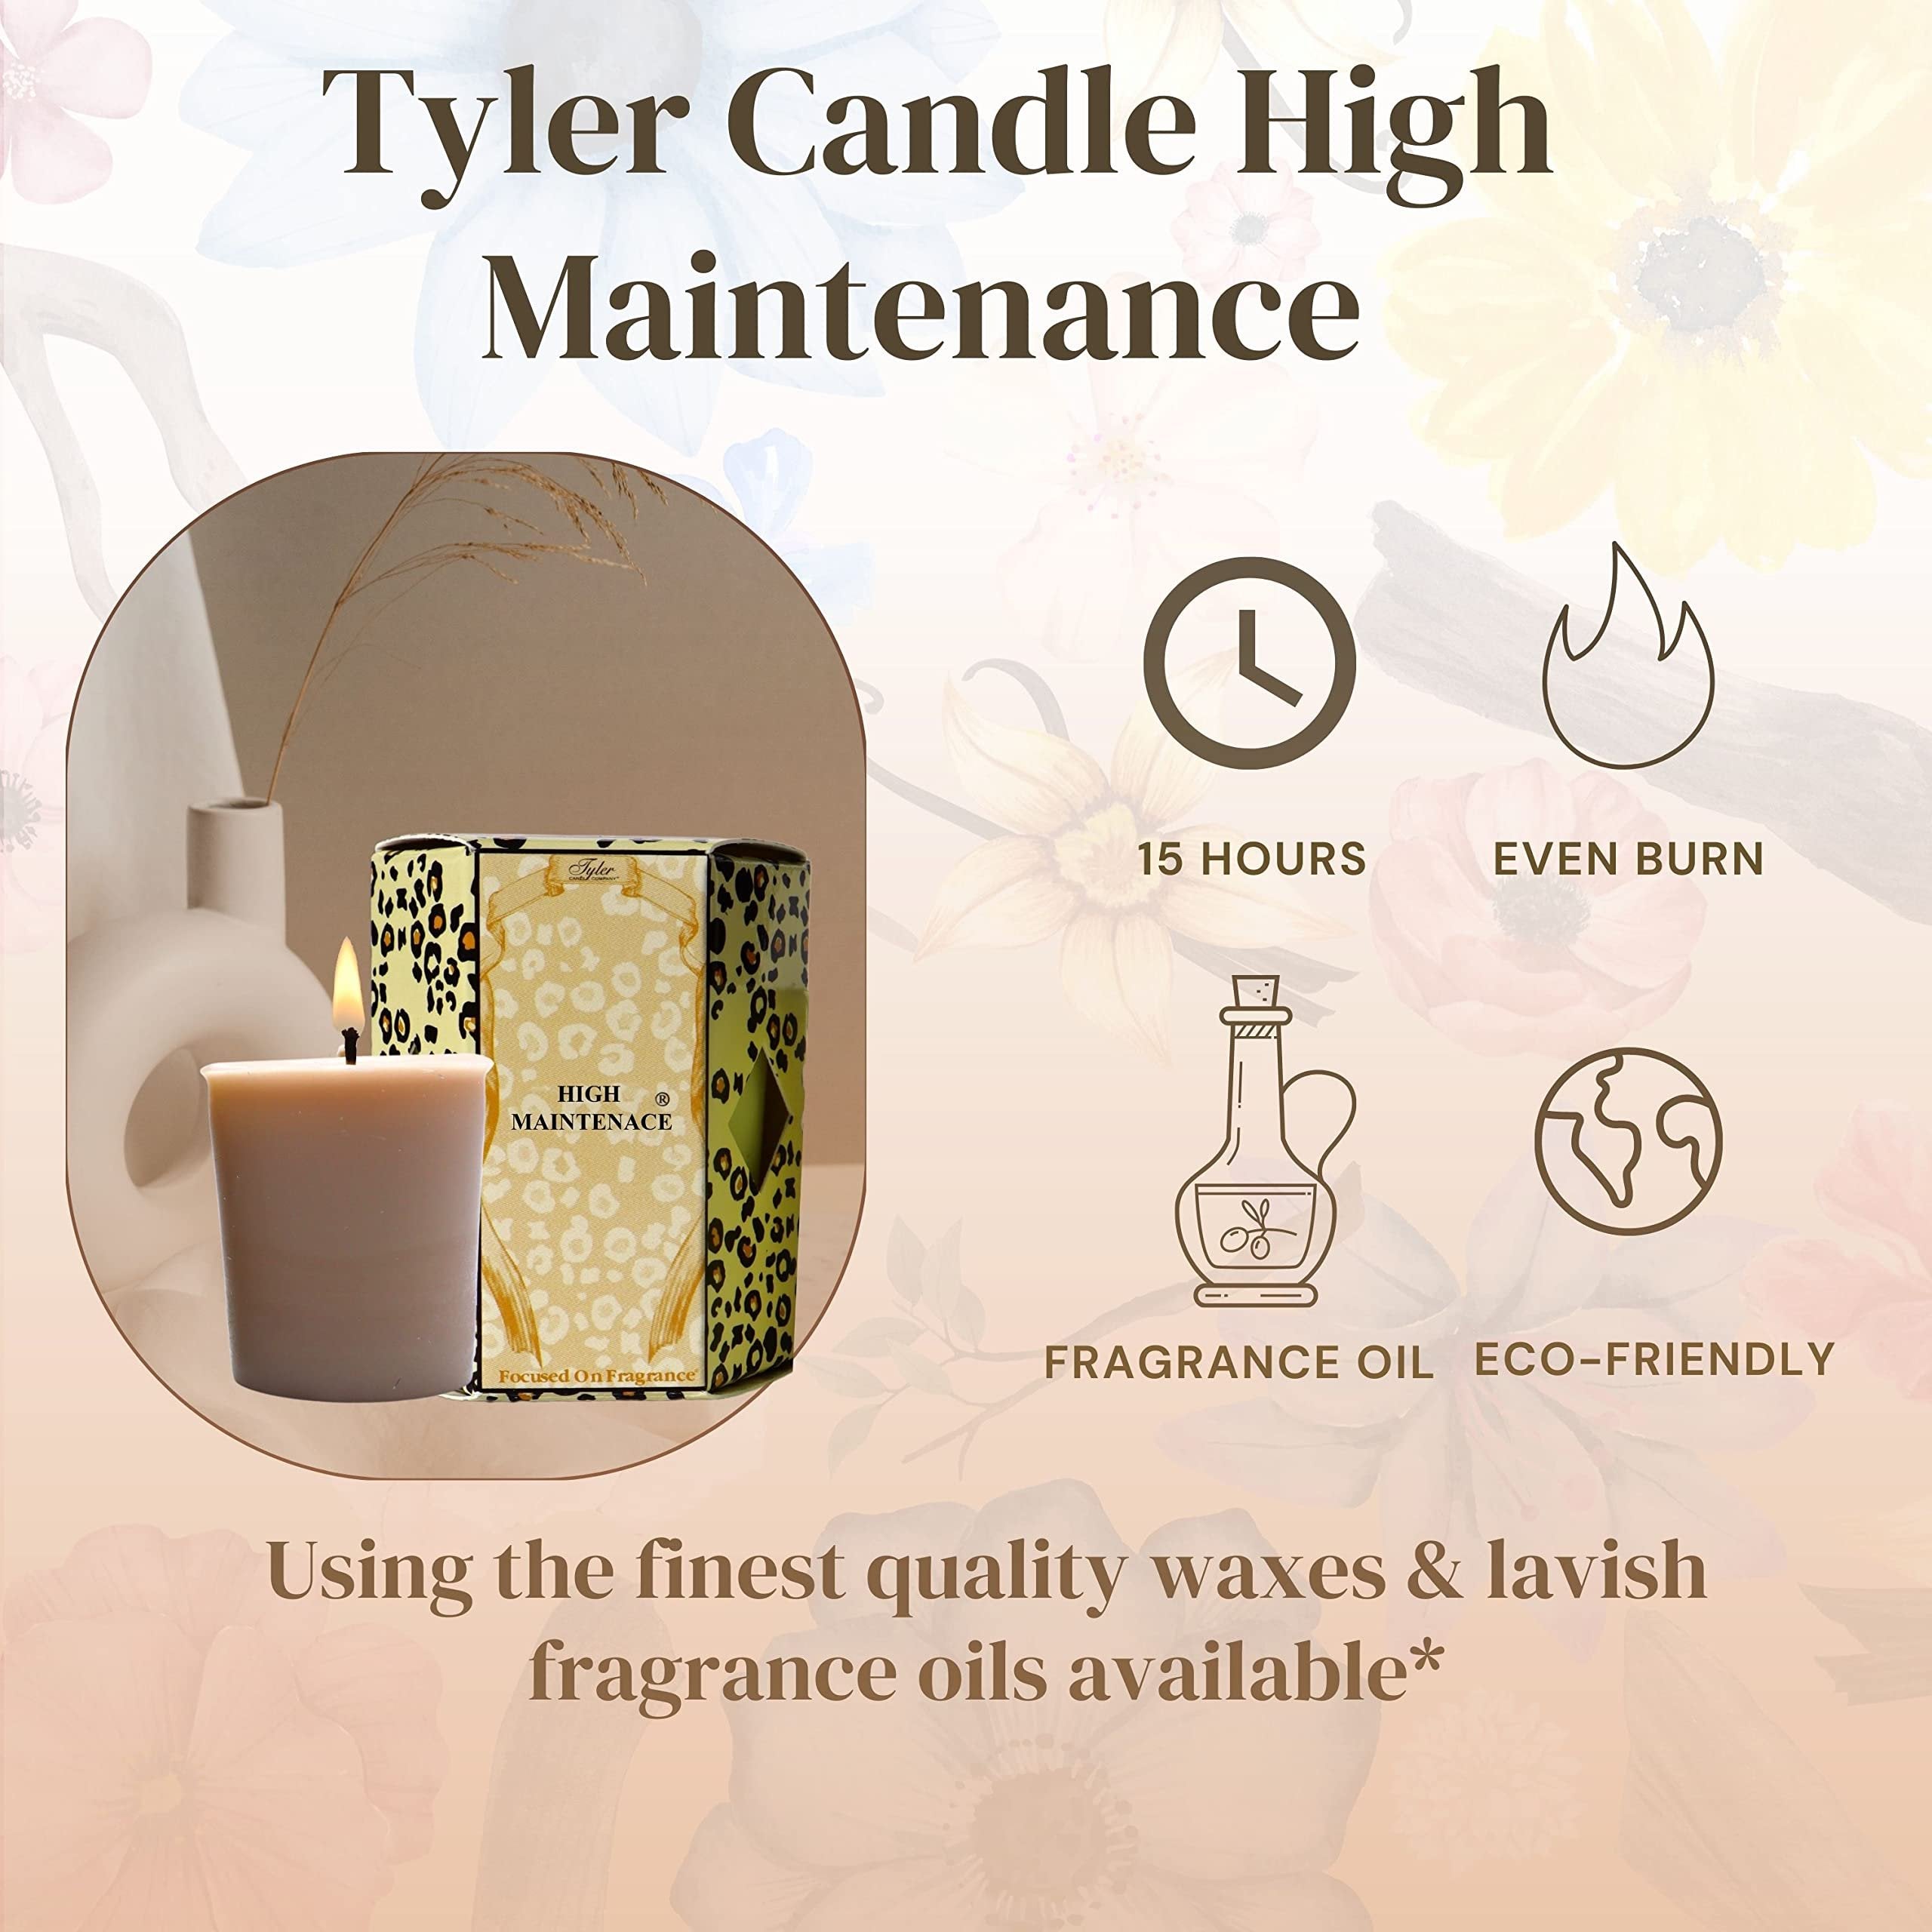 Tyler Candle Company High Maintenance Votive Candles - Luxury Scented Candle with Essential Oils - 4 Pack of 2 oz Small Candles with 15 Hour Burn Time Each - with Bonus Key Chain